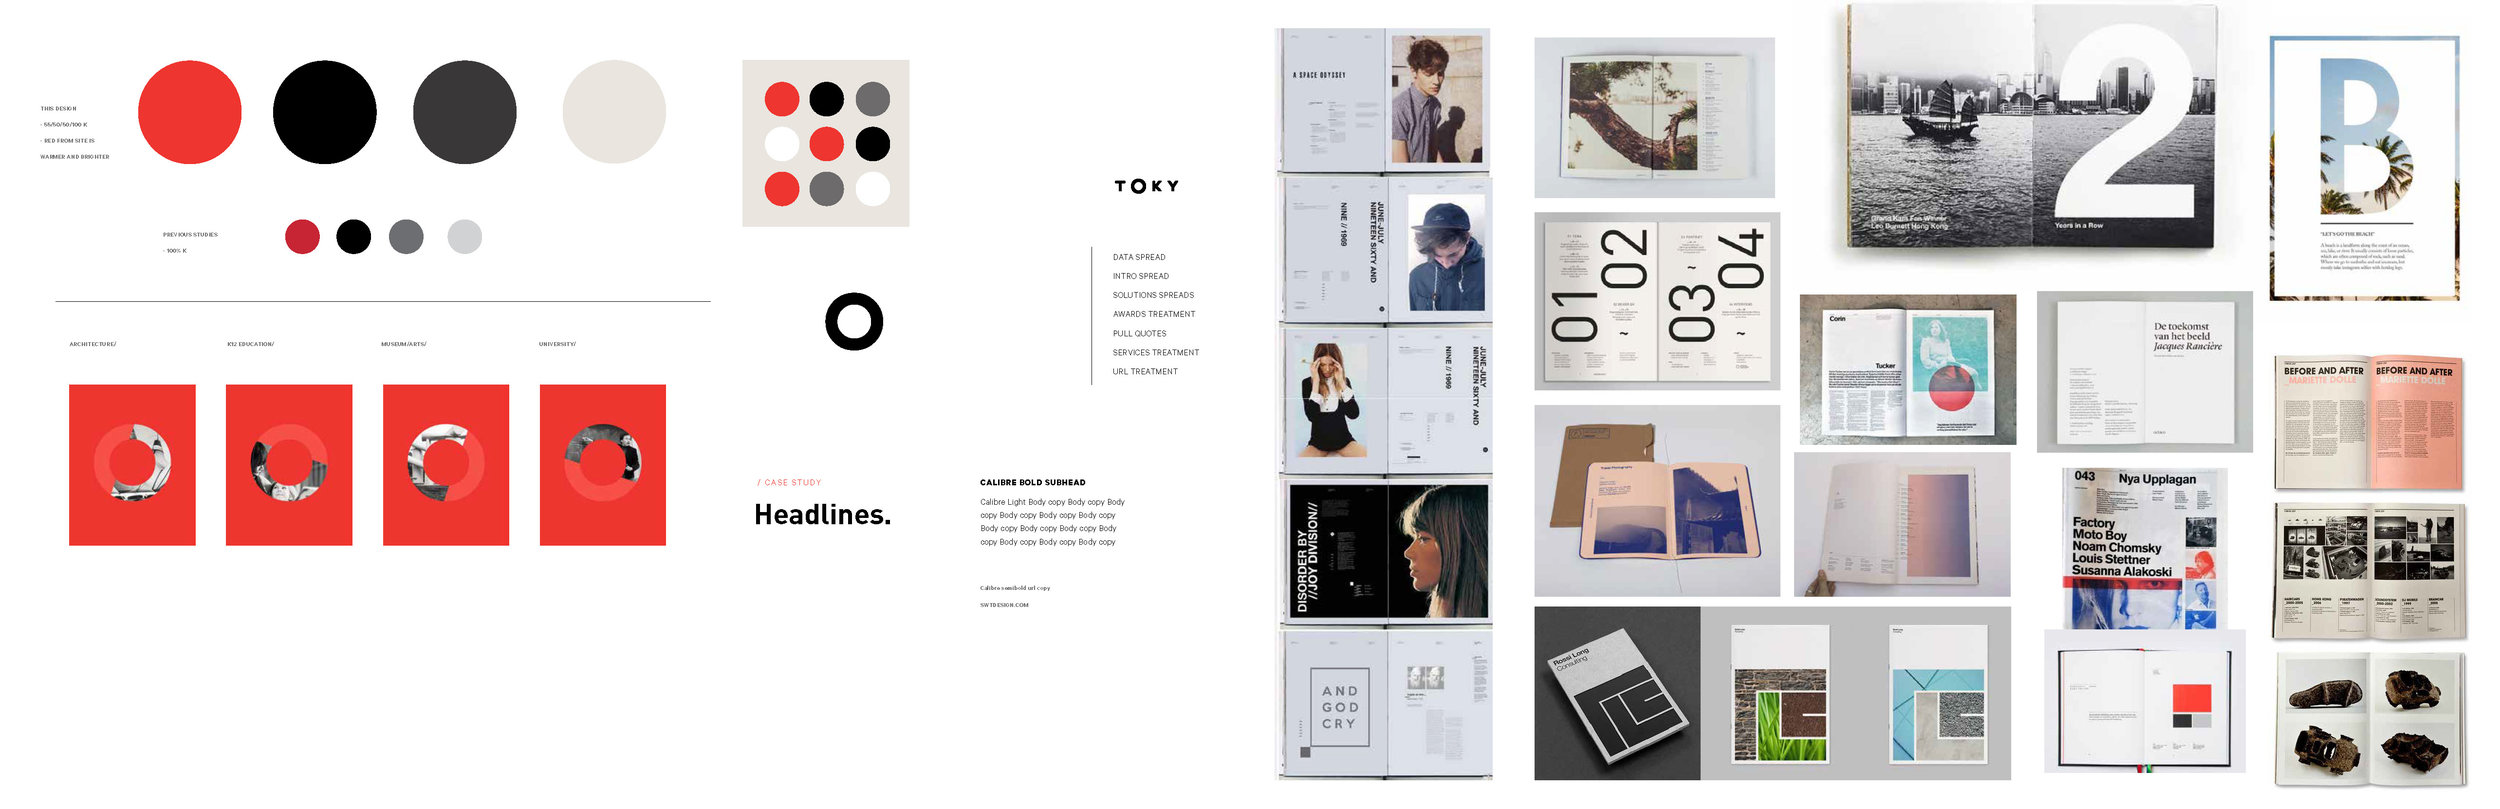 Pages from TOKY_ARCHITECTURE_CASE STUDY_6-5_WIP_Page_1.jpg